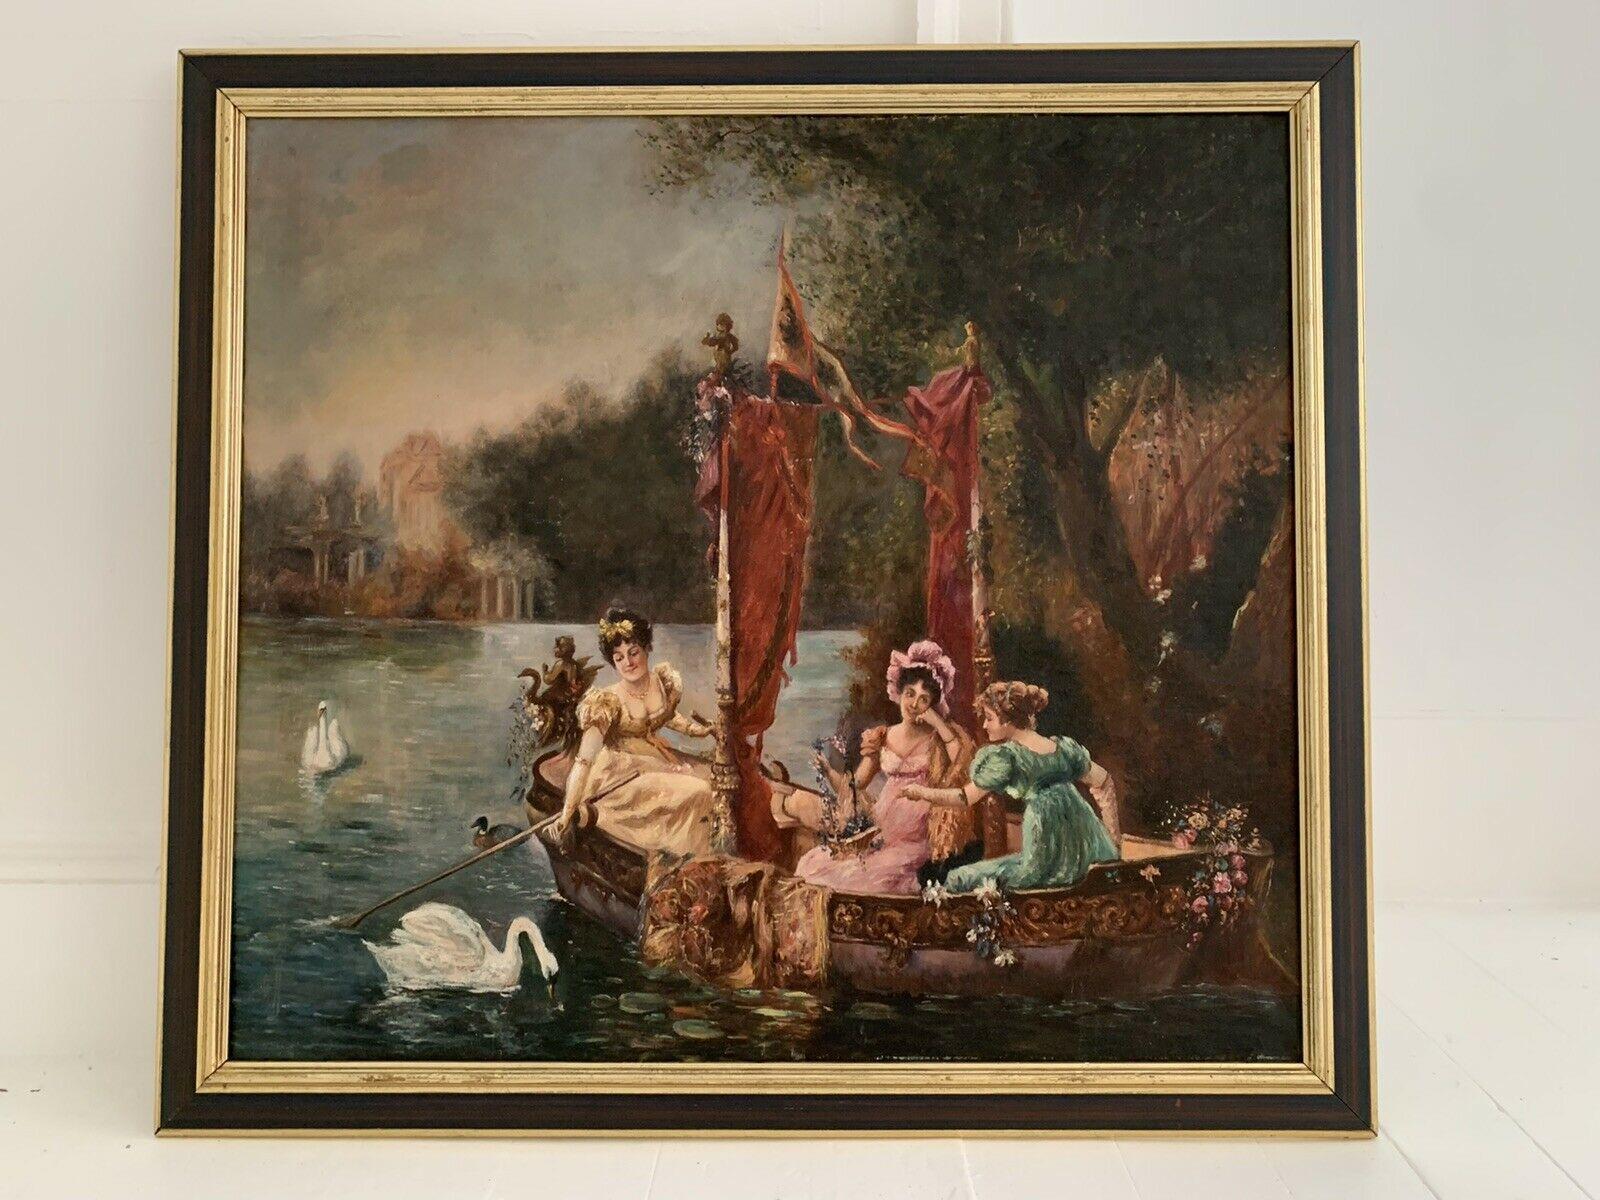 C. 1900 FRENCH BELLE EPOQUE HUGE OIL PAINTING - ELEGANT LADIES BOATING ON LAKE - Painting by Unknown